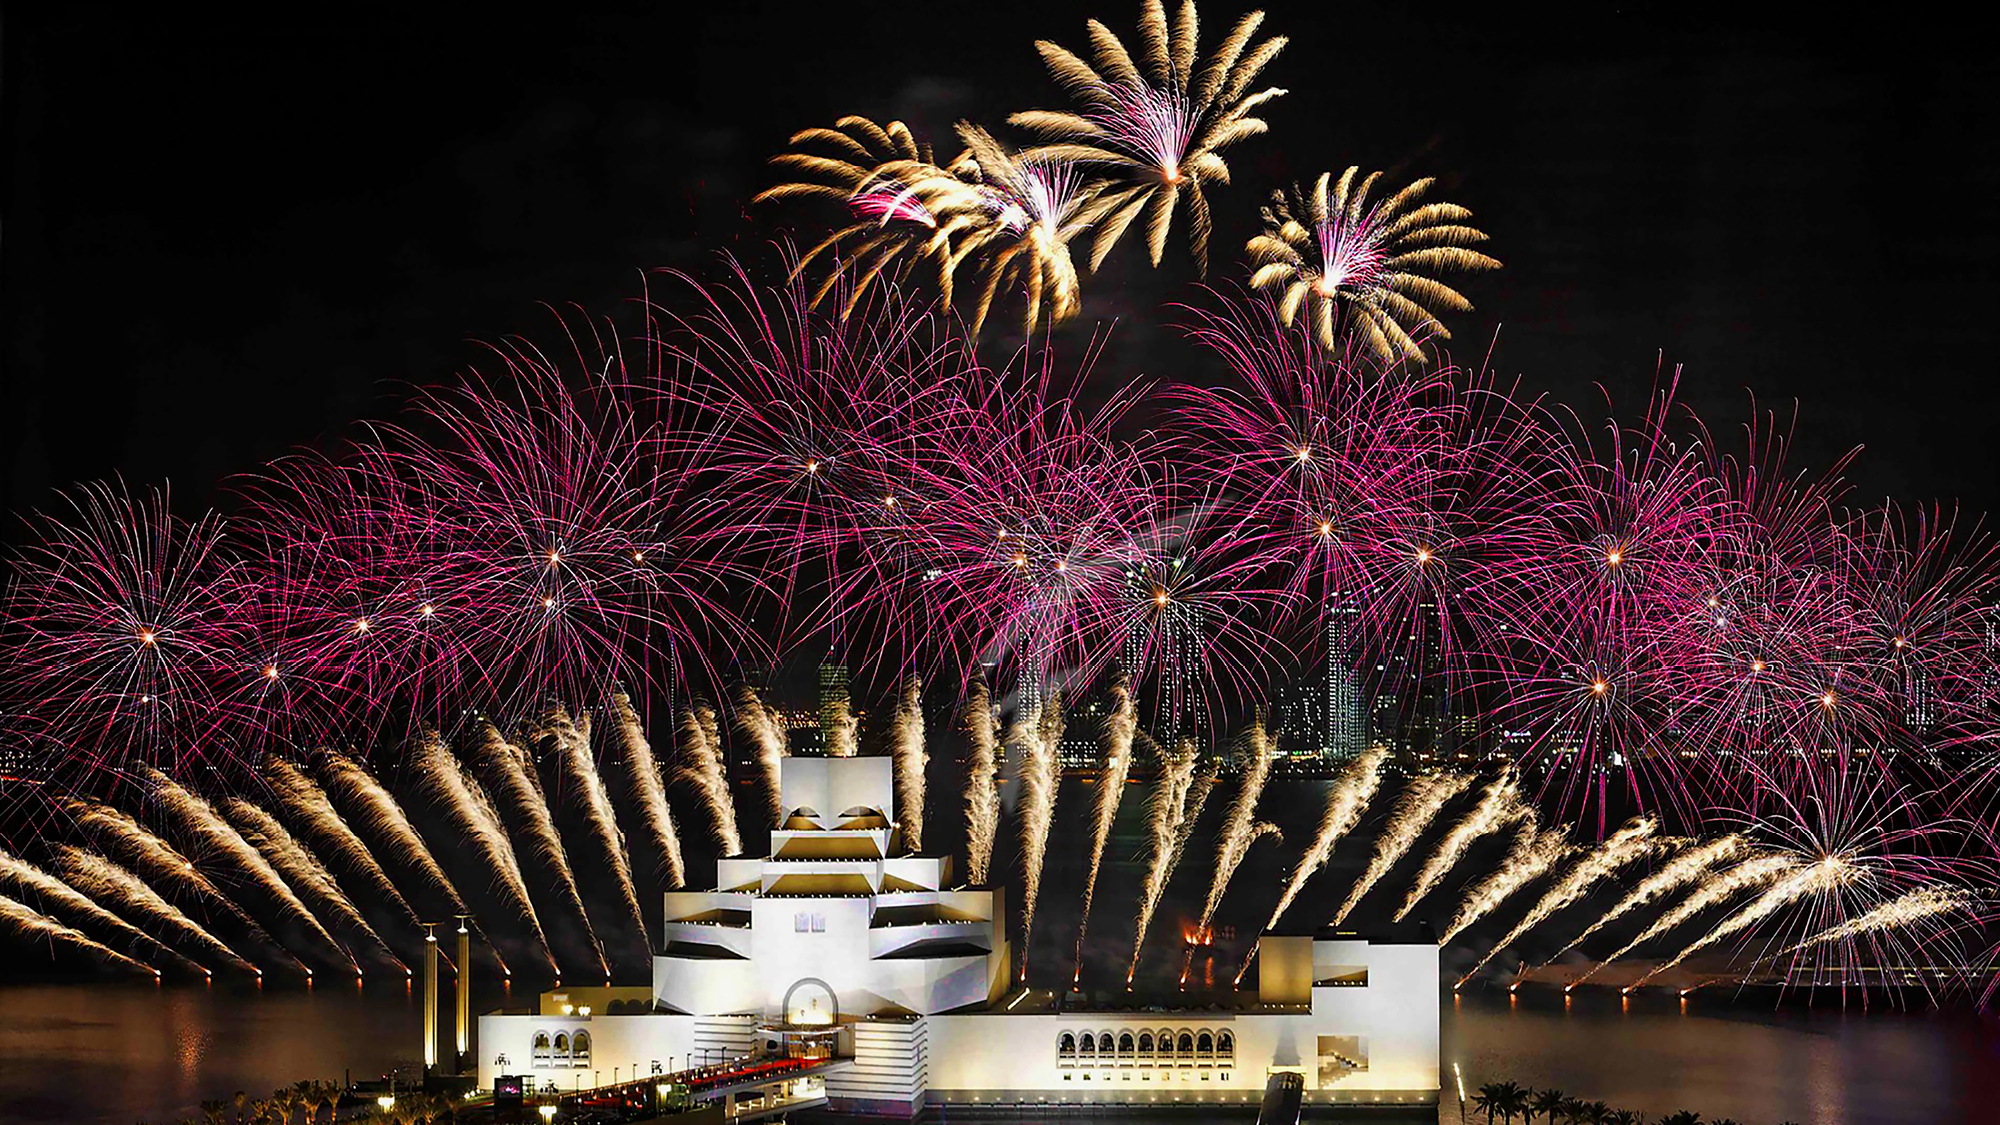 Entity-3-Three-Brand-Design-Agency-Sydney-Years-of-Culture-1-experience-launch-event-fireworks